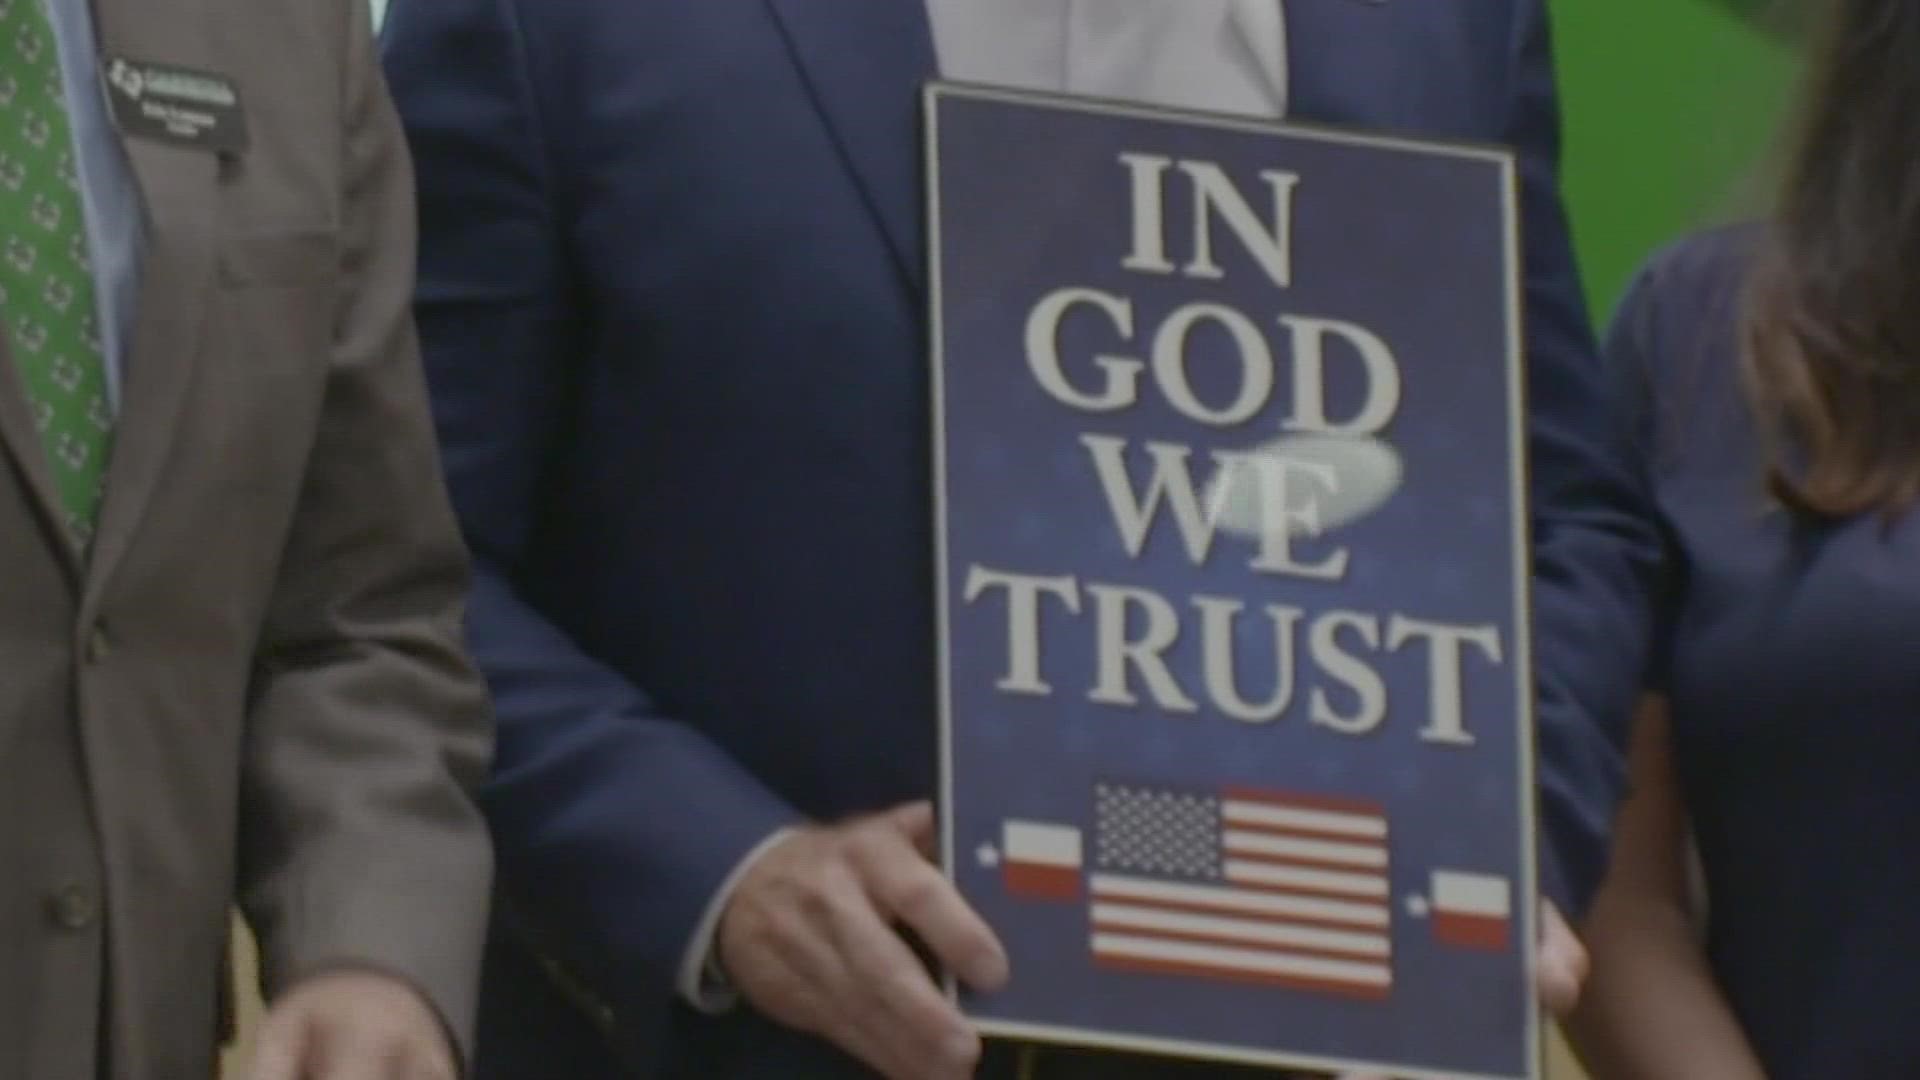 Carroll ISD rejected "In God We Trust" signs that were created by current and former students that were designed in rainbow colors and in Arabic language.